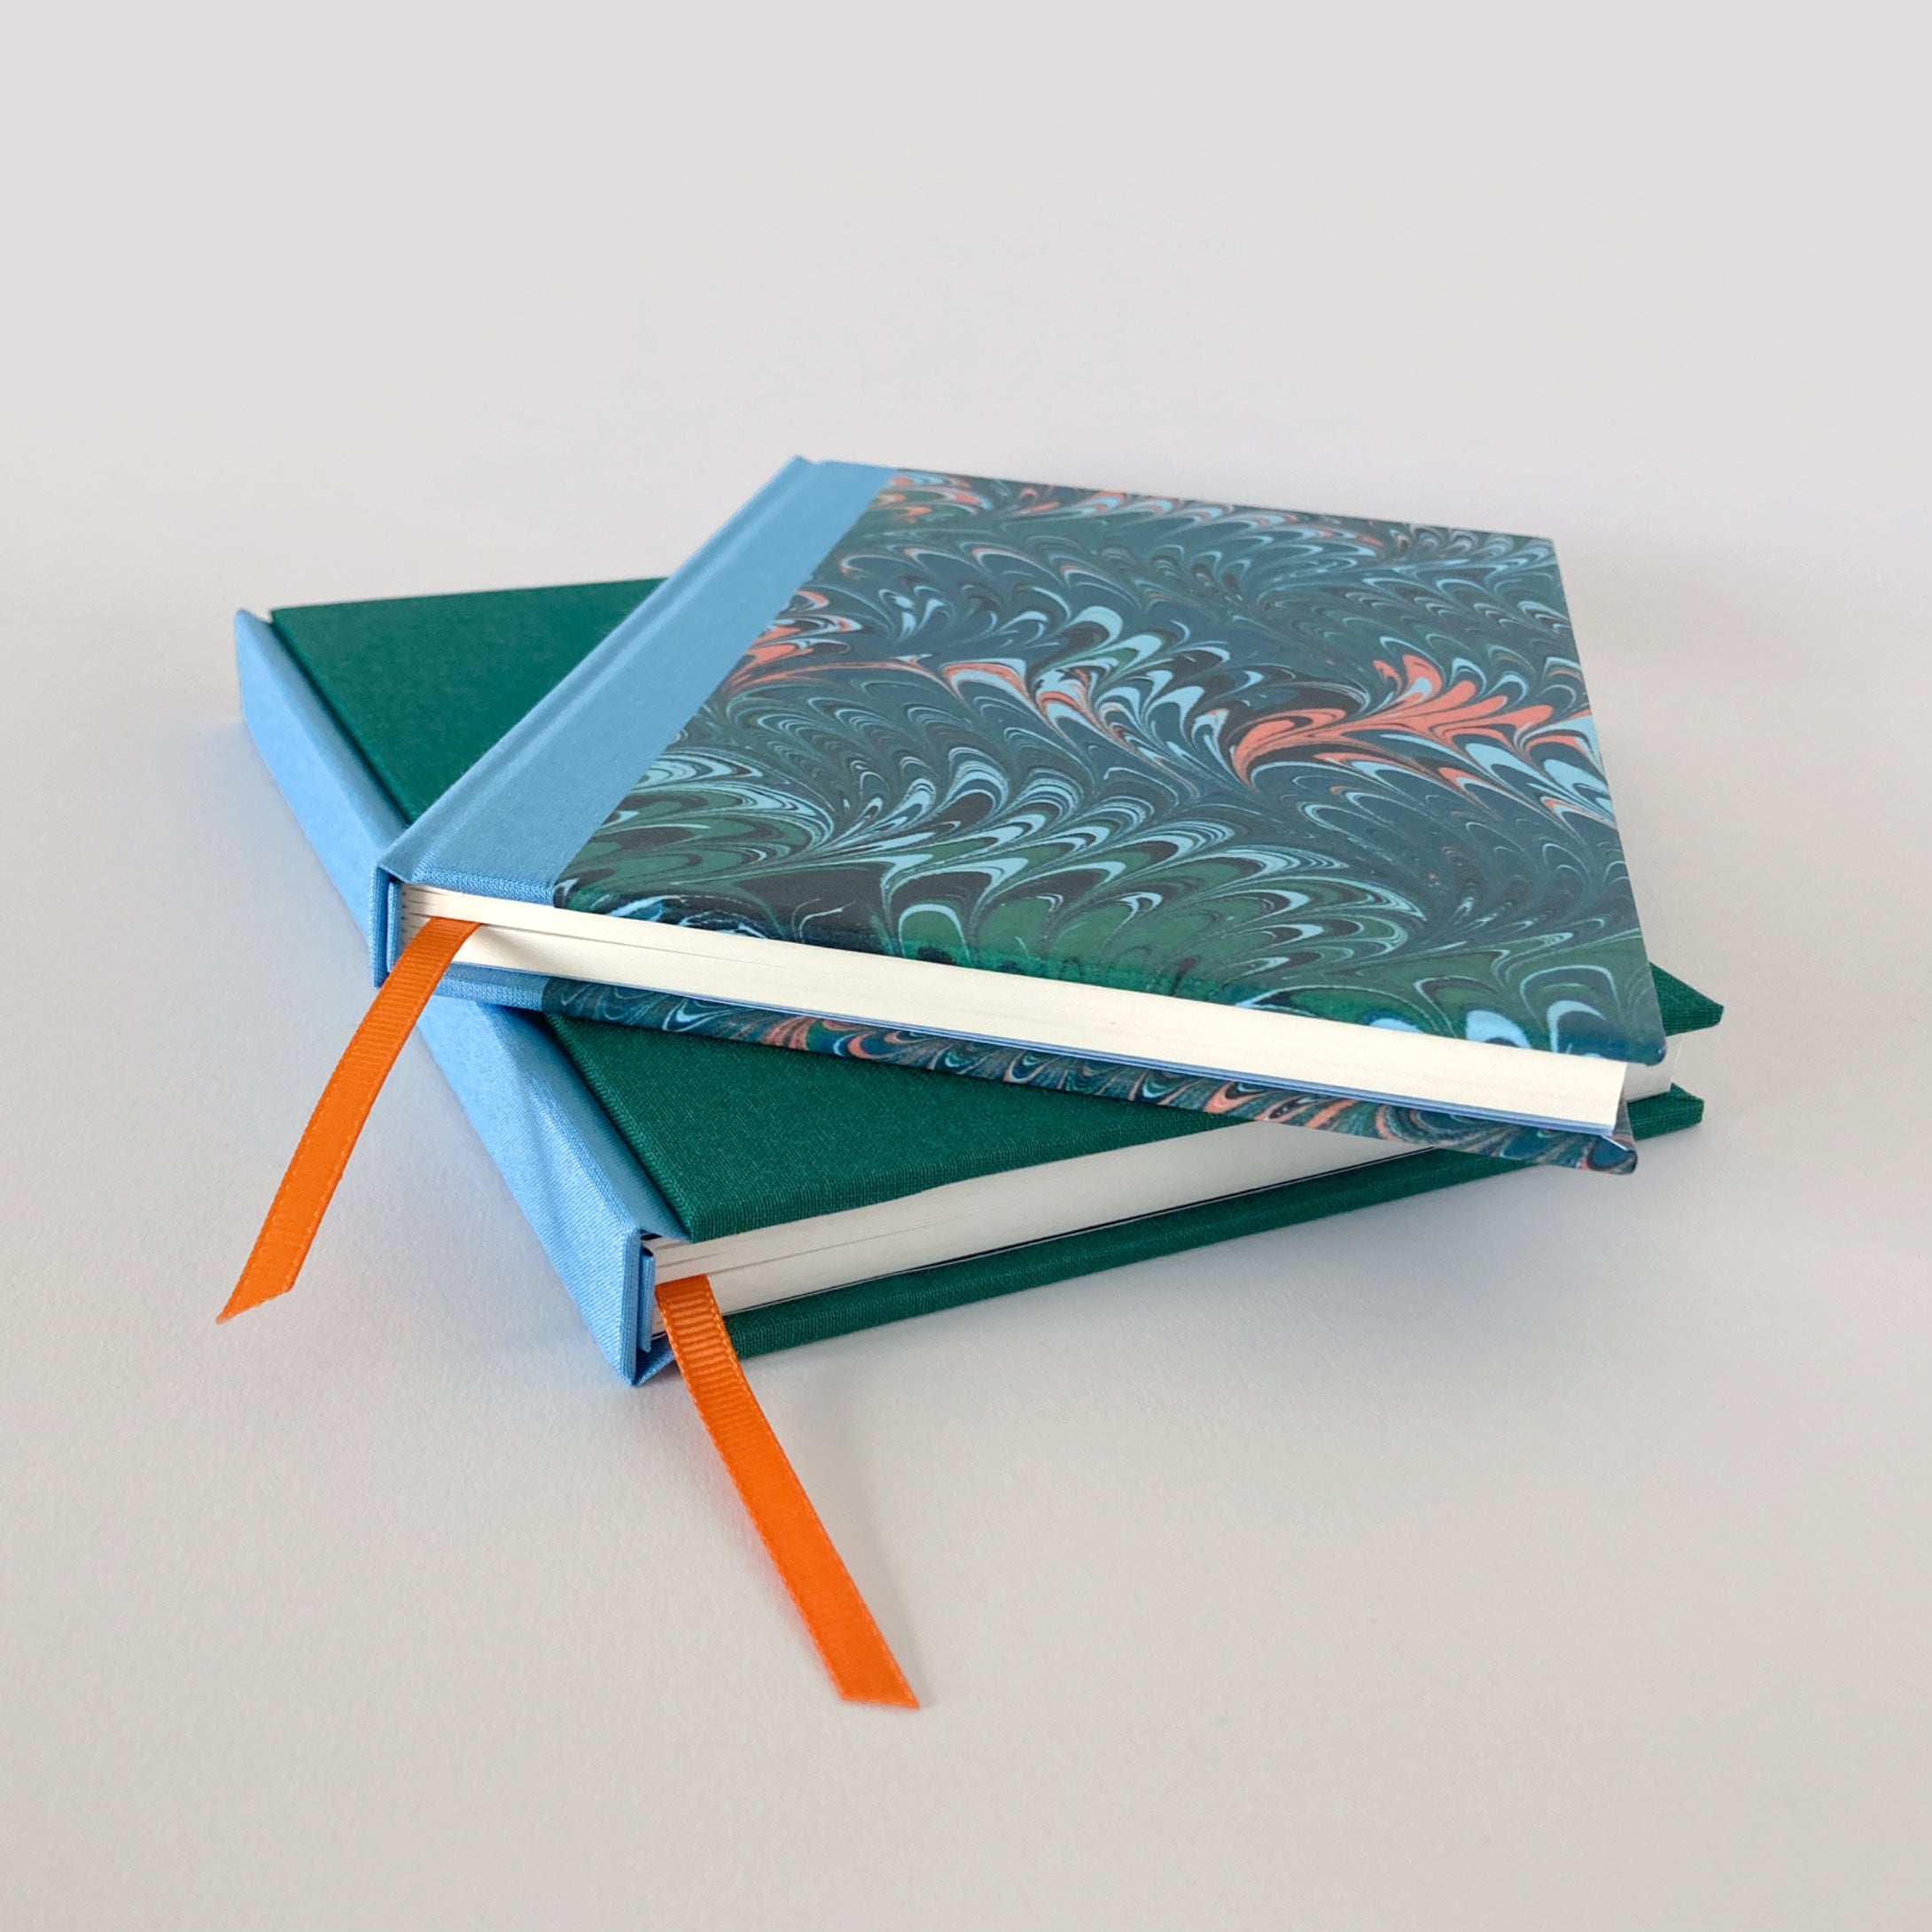 Green and blue clothbound sketchbook with green marble notebook.